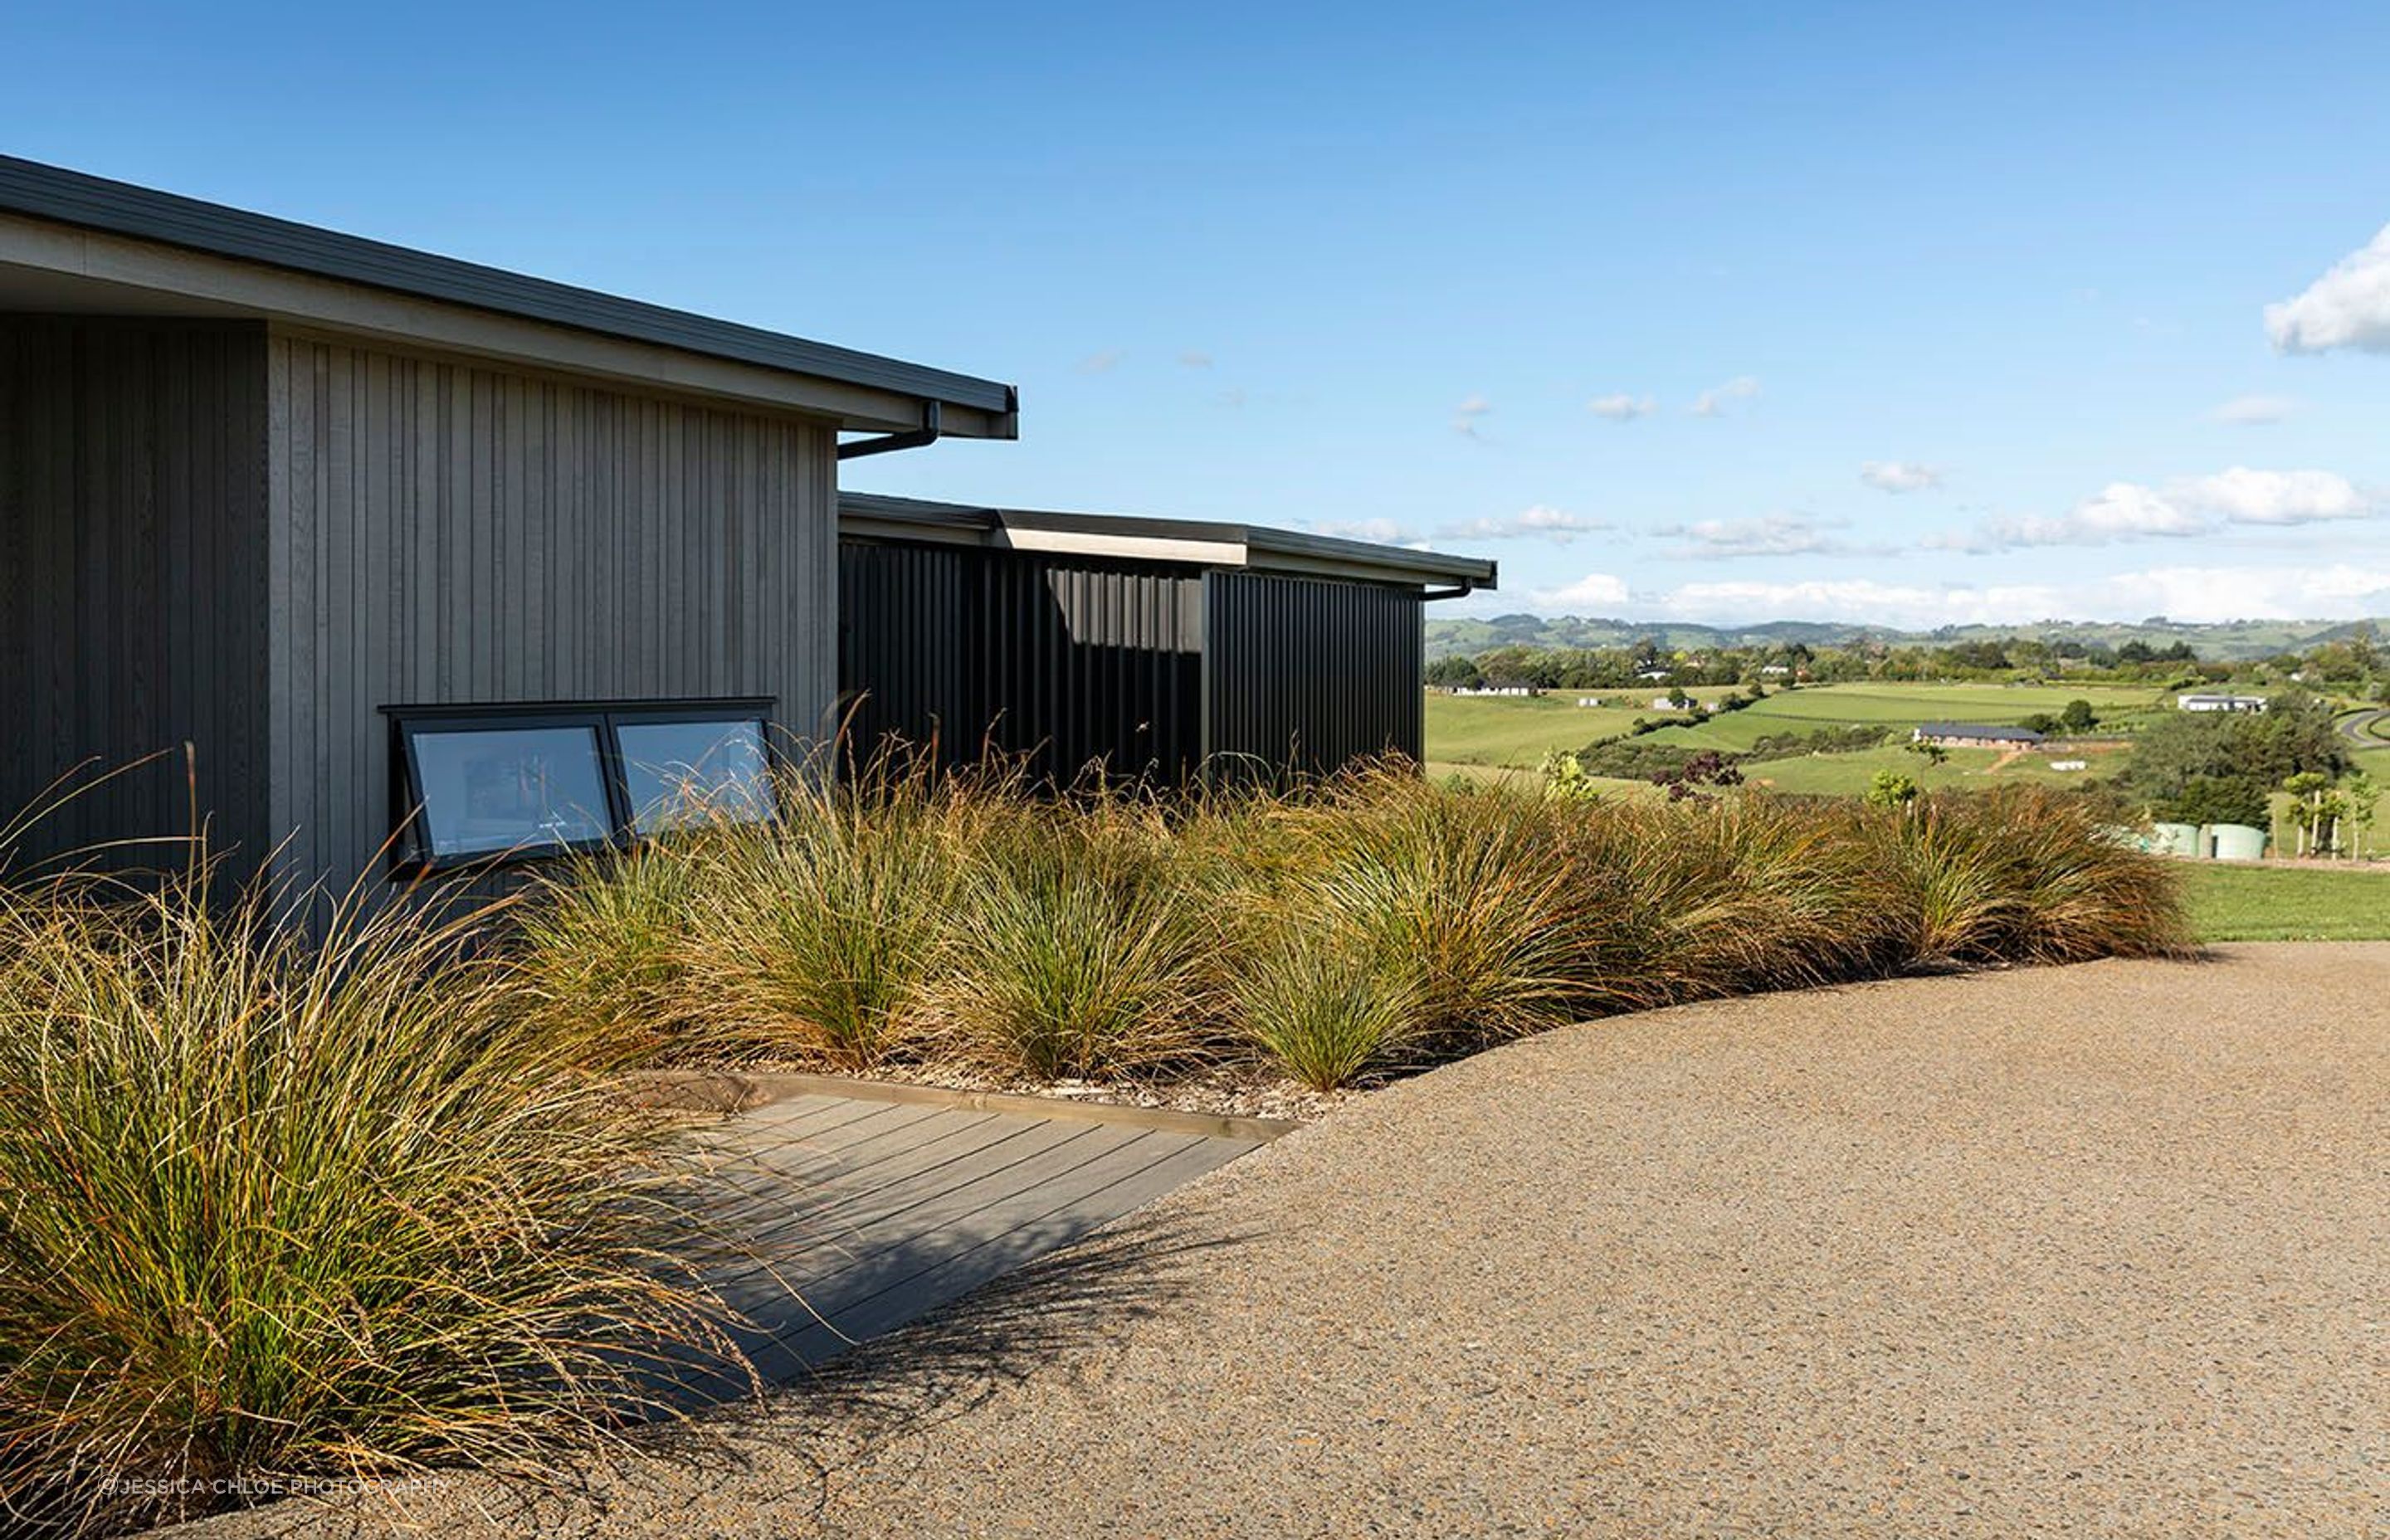 Cladding variations share vertical lines and rest well within the landscape